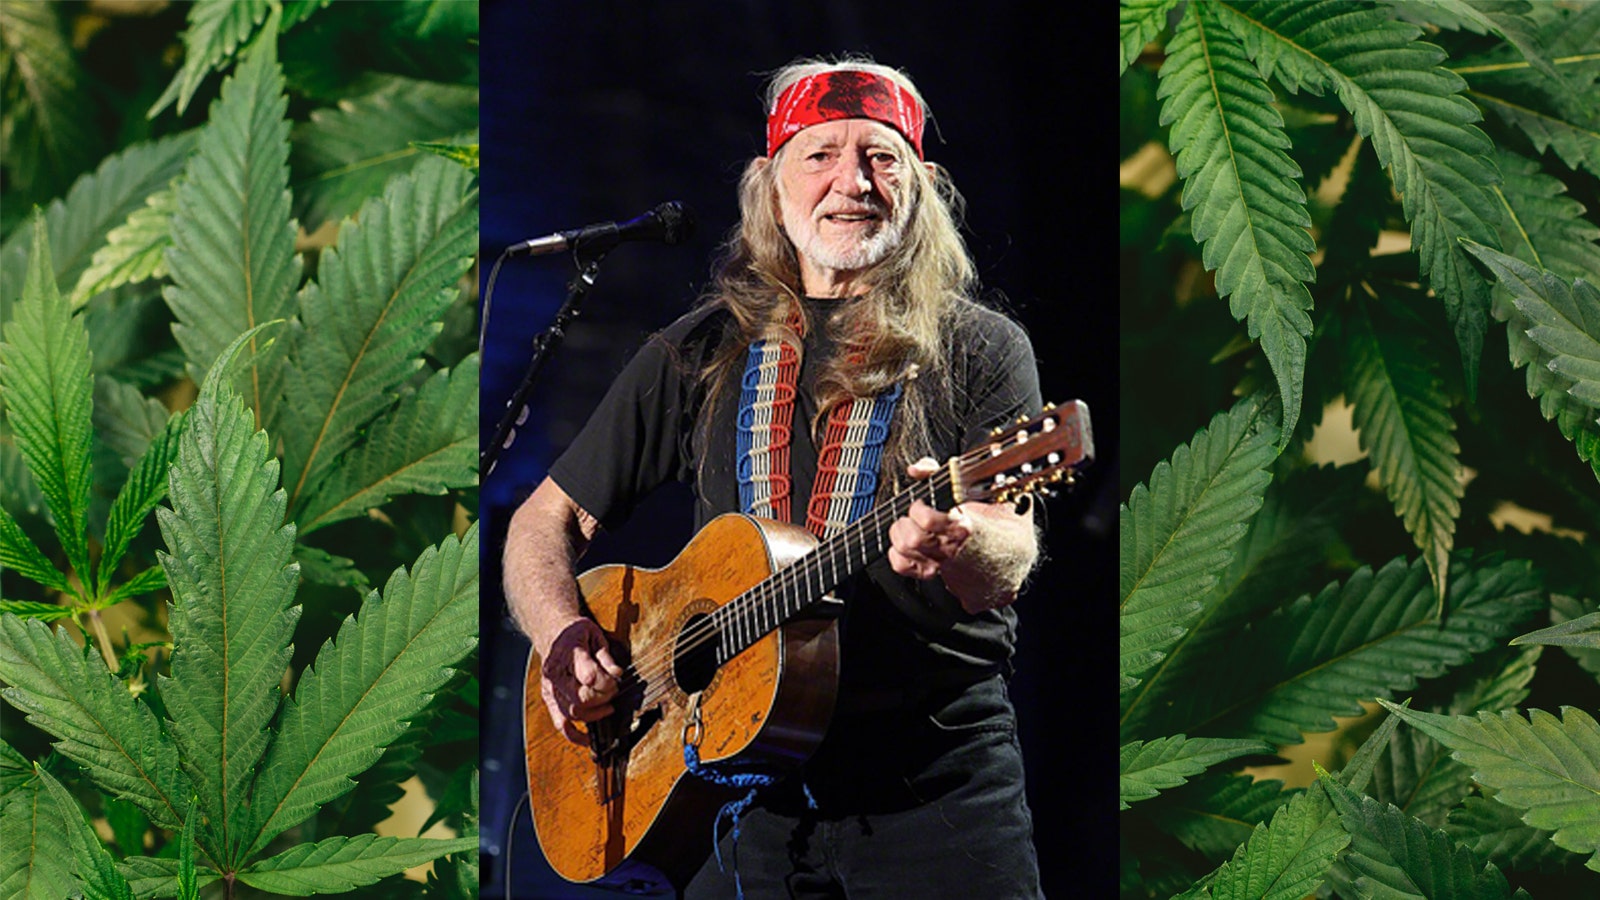 Willie Nelson & Snoop Dogg Once Tried To 'Out Smoke' Each Other, We're All Invited To The Legend's 90th Birthday Jam